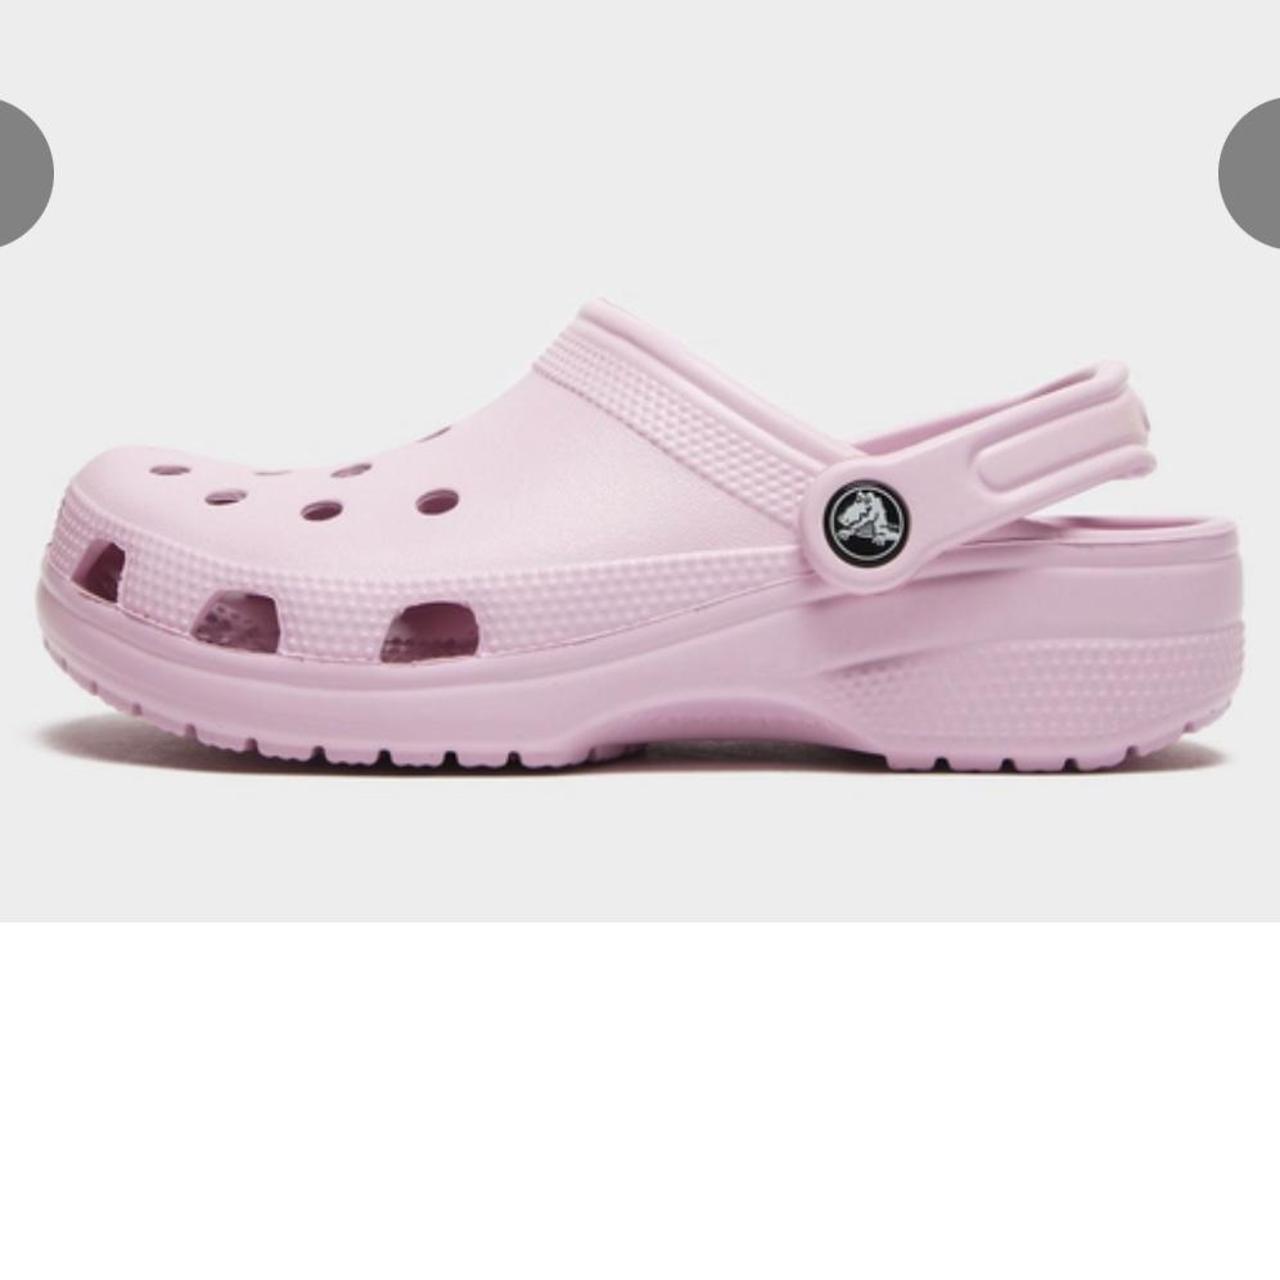 light pink crocs love these they are so cute for... - Depop